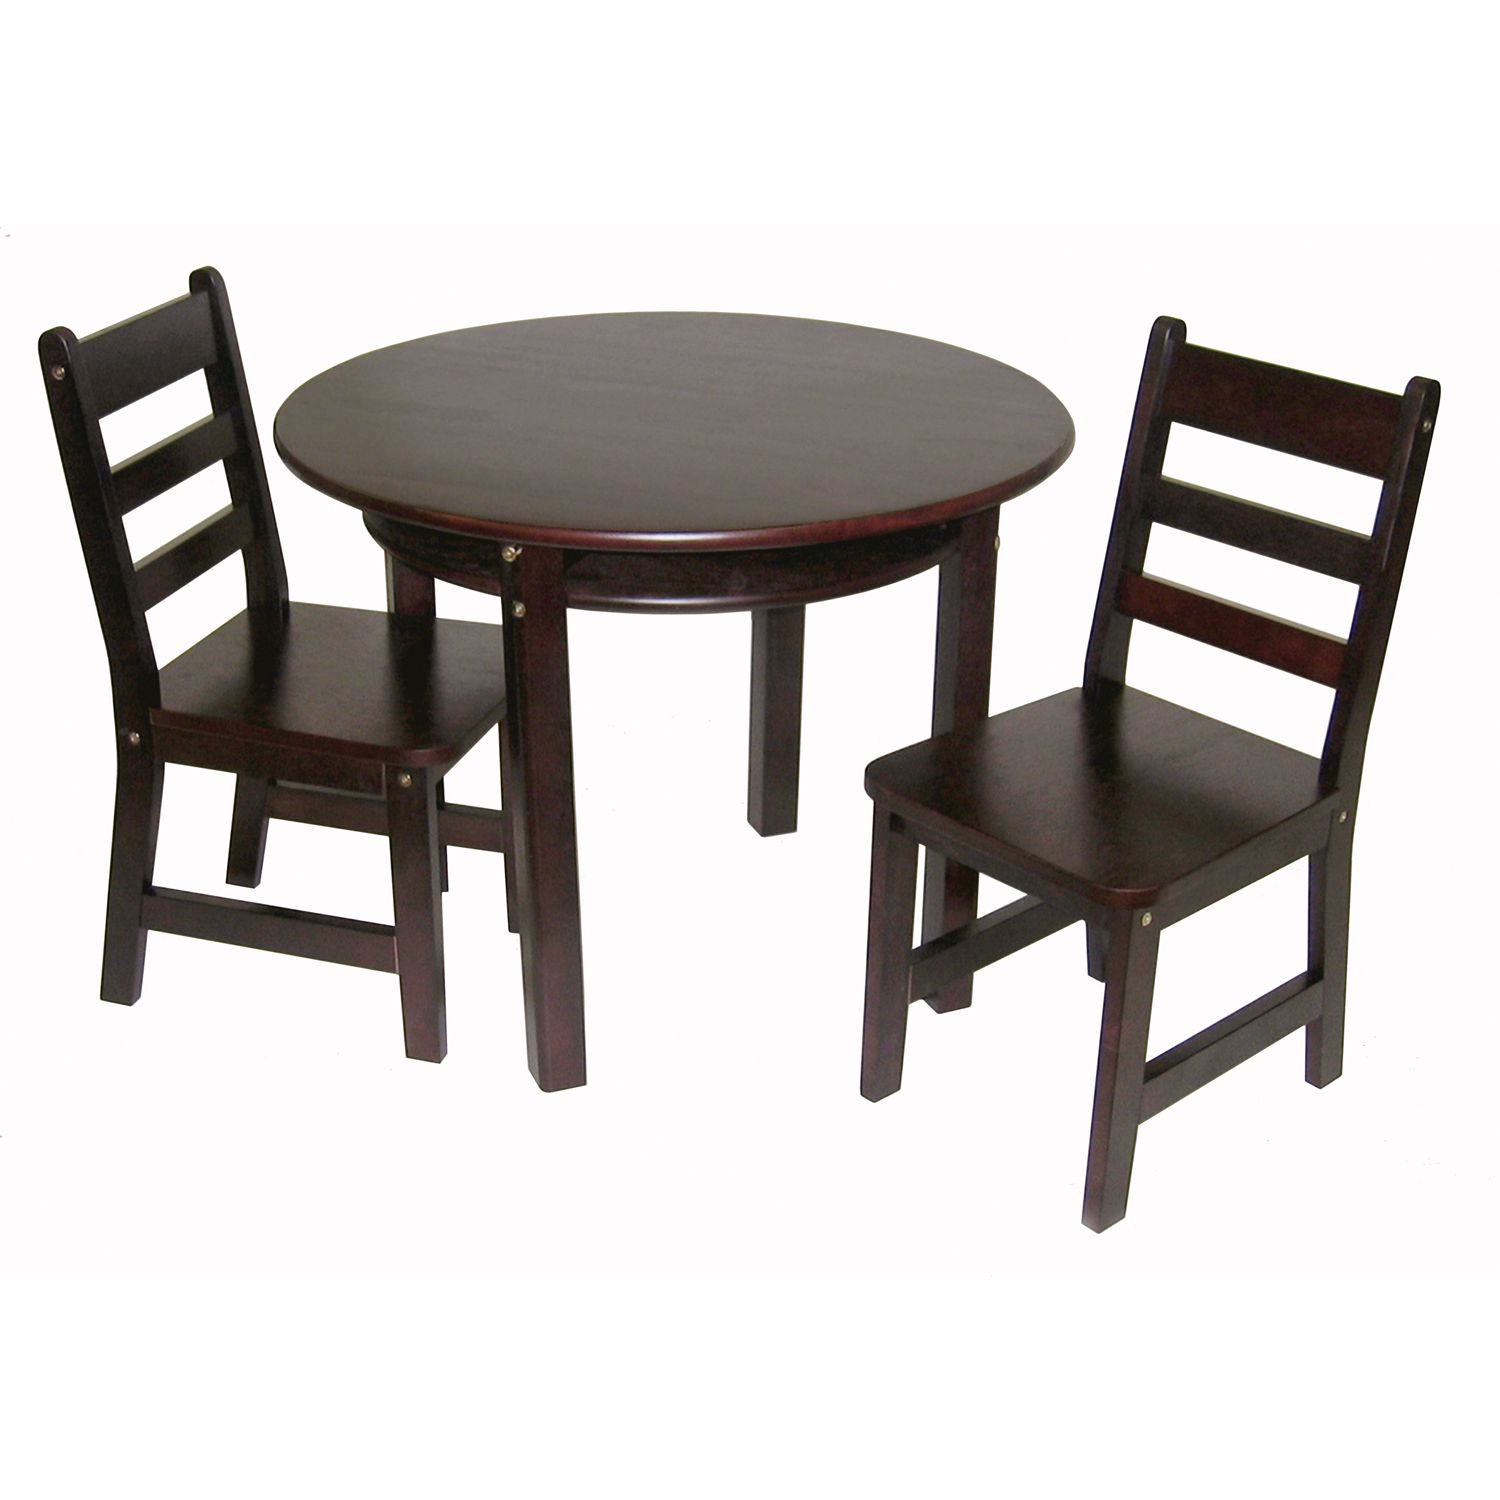 lipper childrens round table and chair set